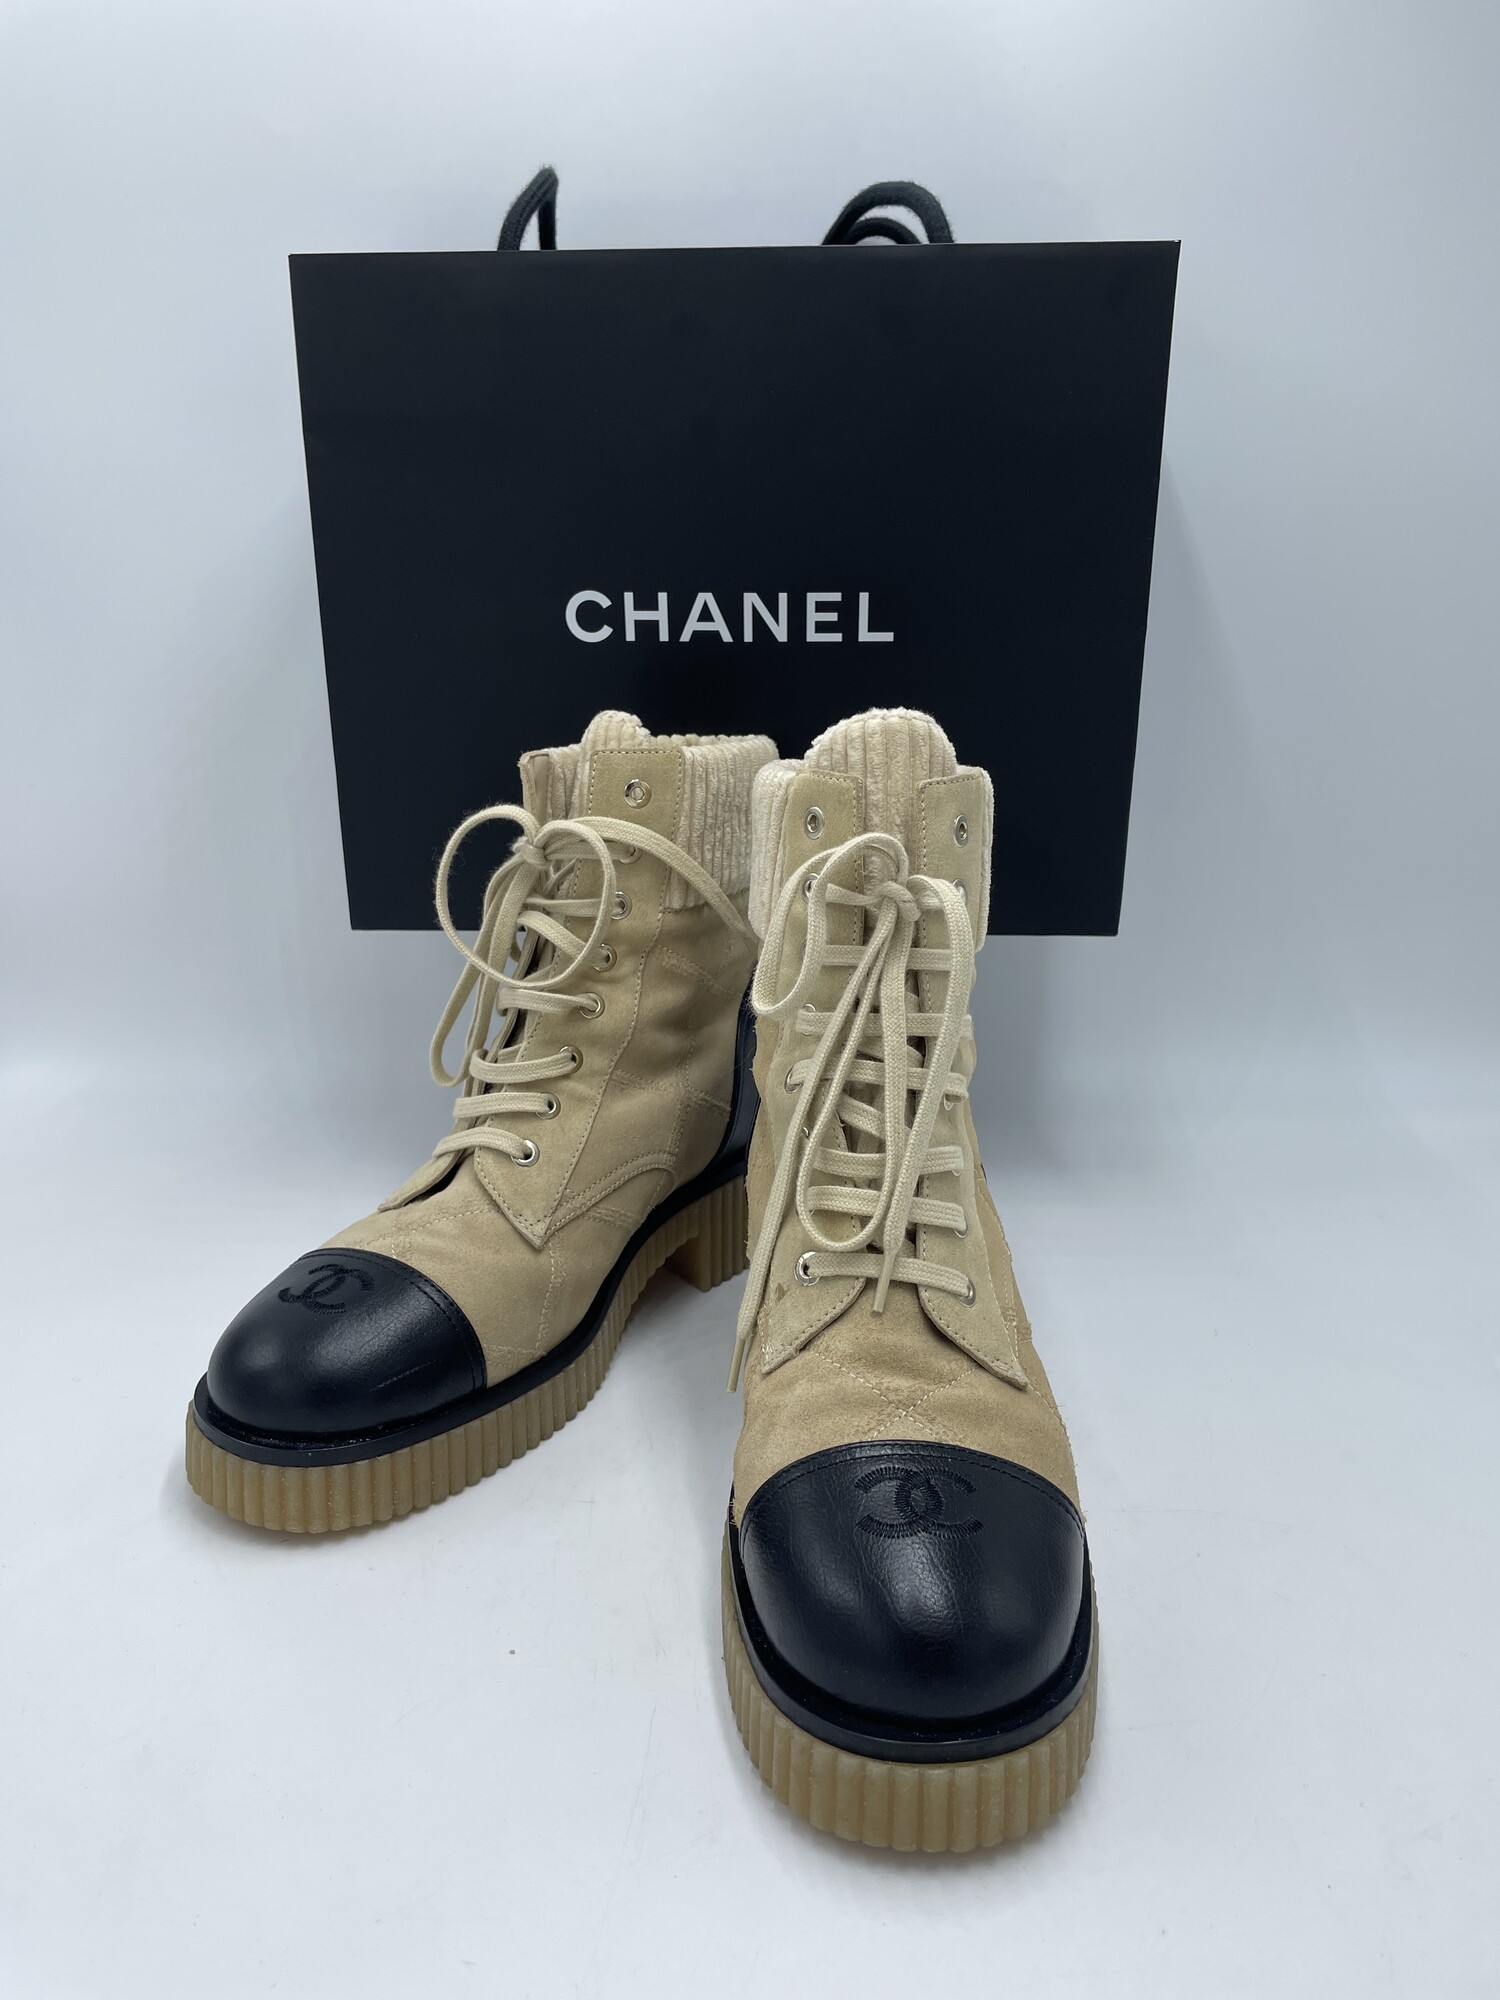 Chanel Quilted Combat Boots<br />
Color:  Tan, Black<br />
Size: 39<br />
Conditon: small spot near bottom lace